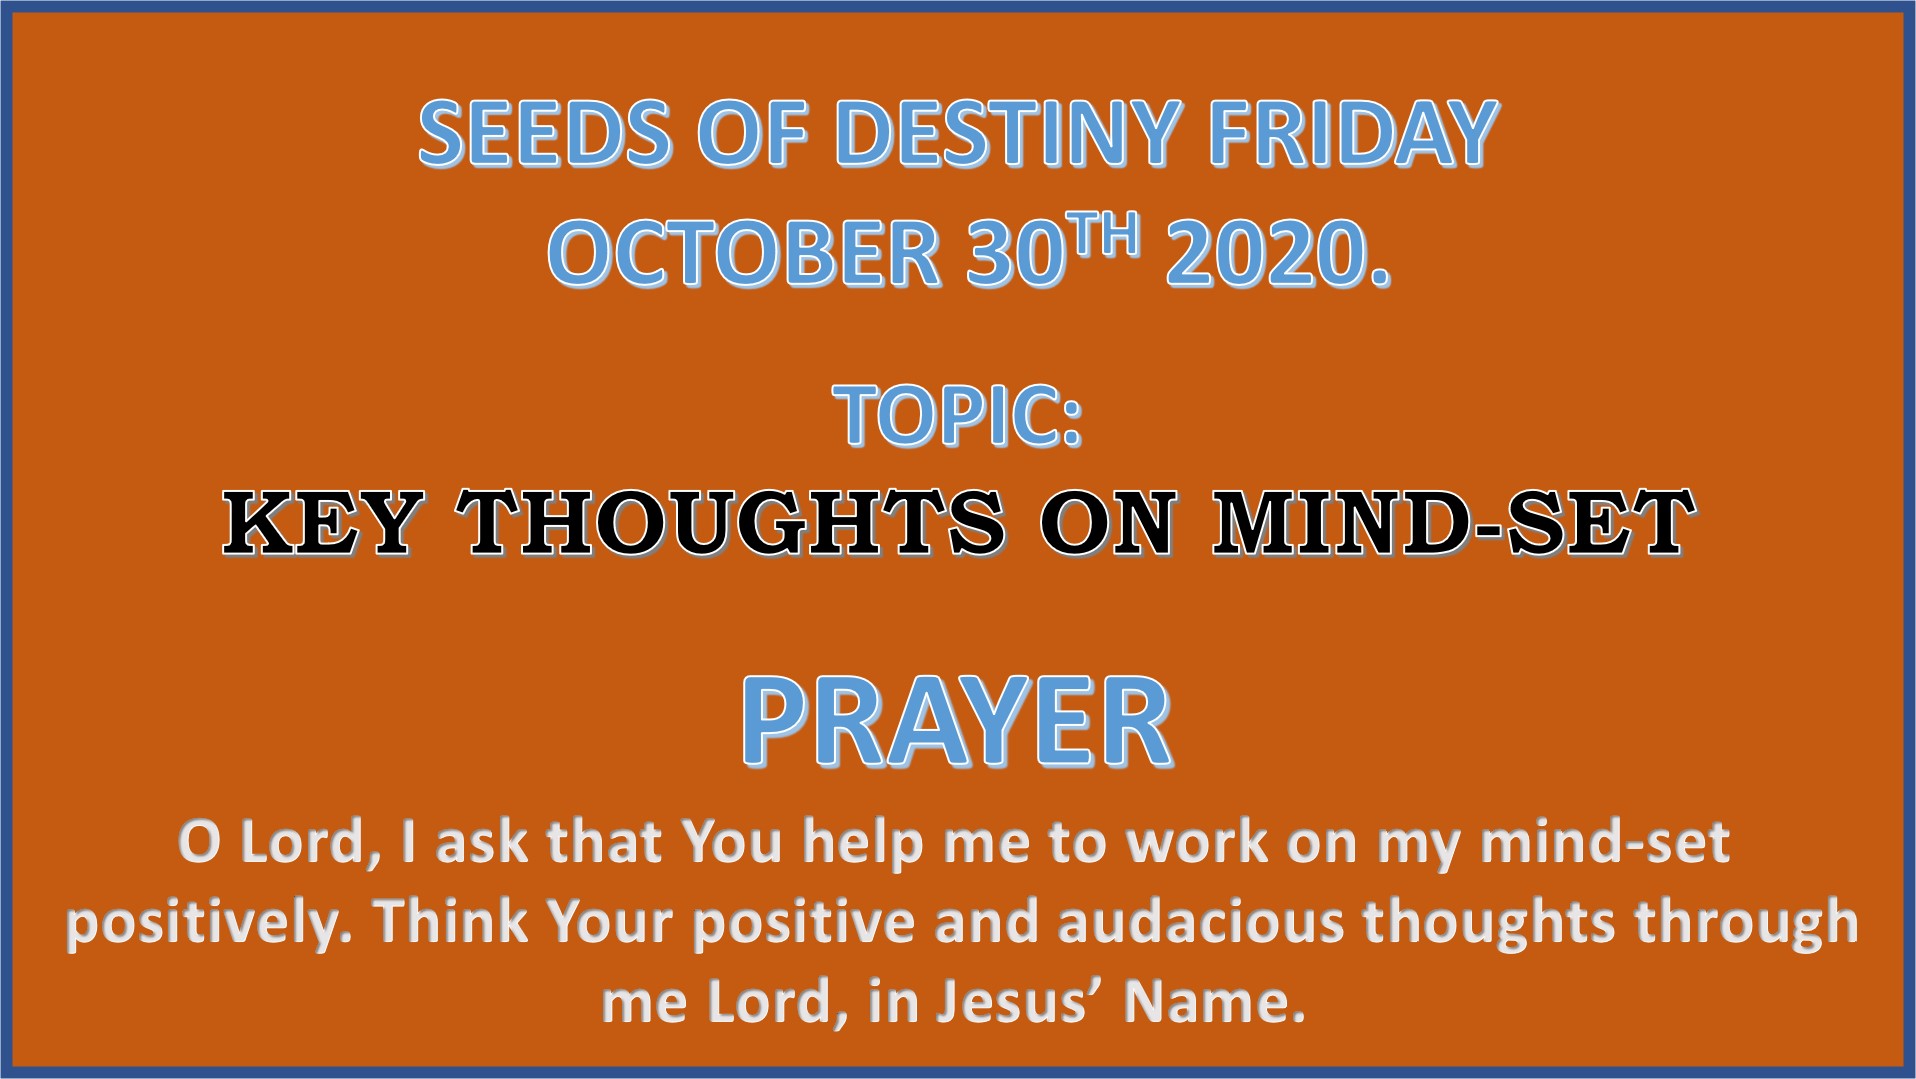 Seeds of Destiny Friday 30th October 2020 by Dr Paul Enenche